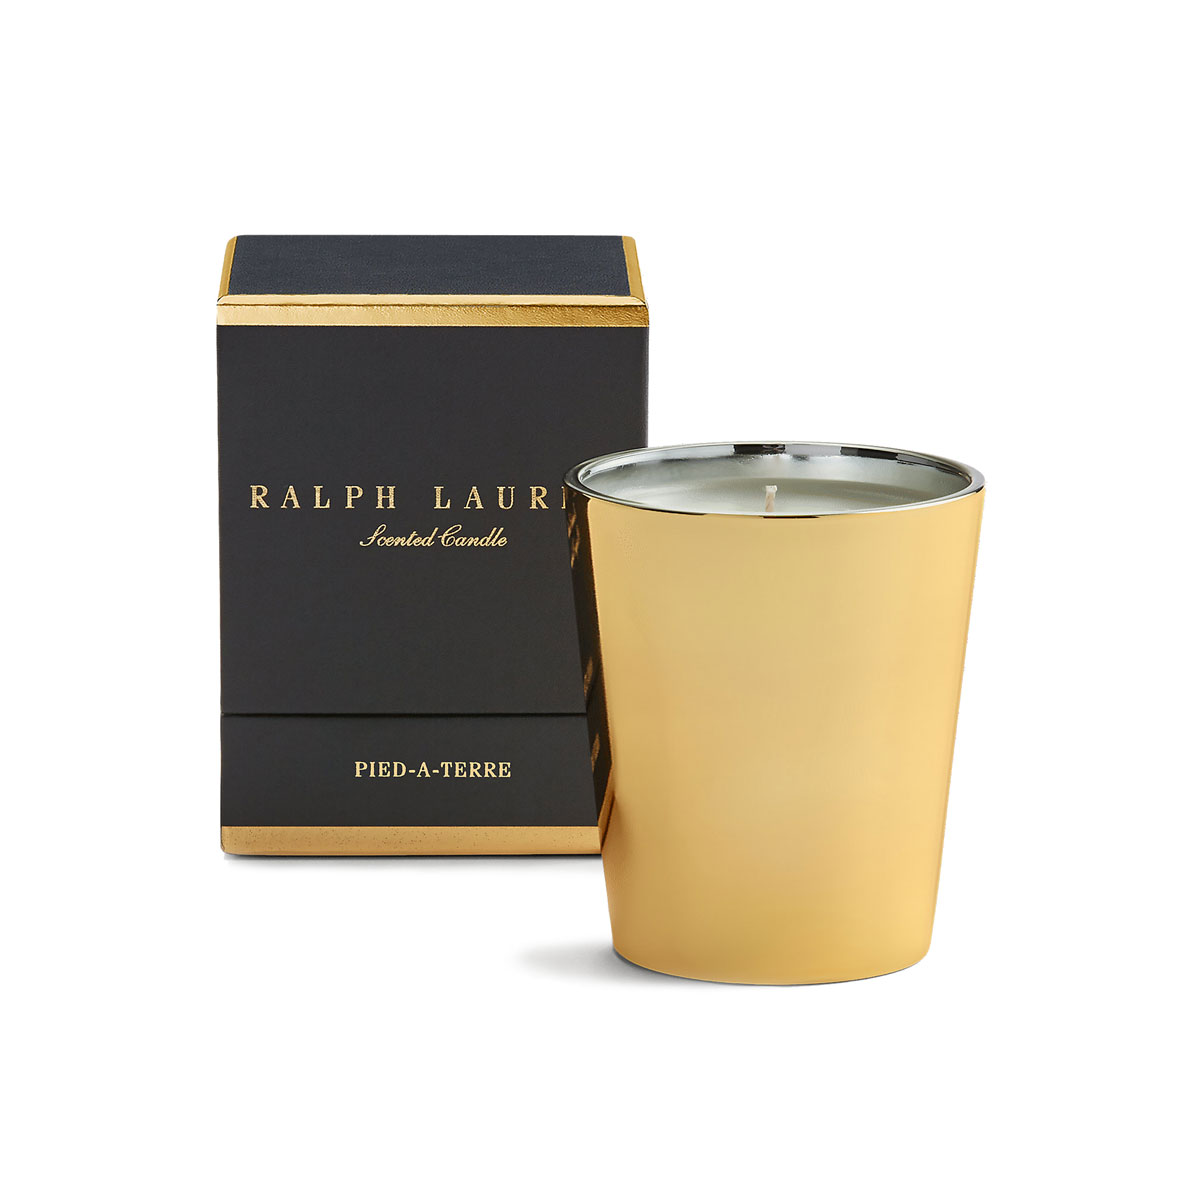 Ralph Lauren Pied a Terre Single Wick Scented Candle in Gift Box